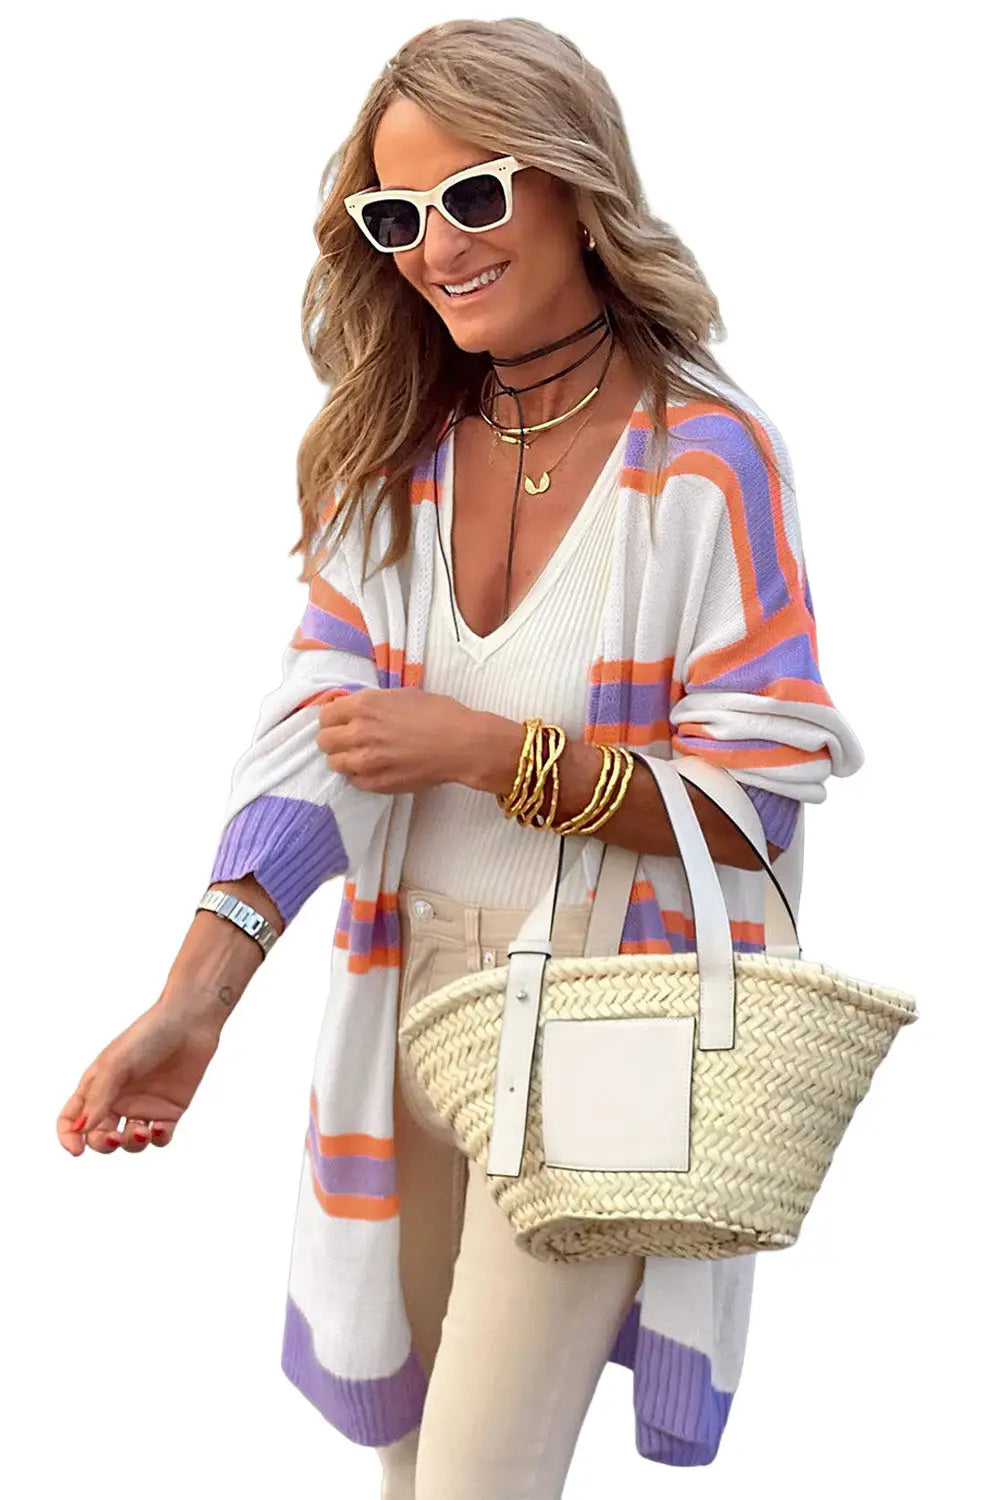 Beige striped long sleeve ribbed trim button cardigan - sweaters & cardigans